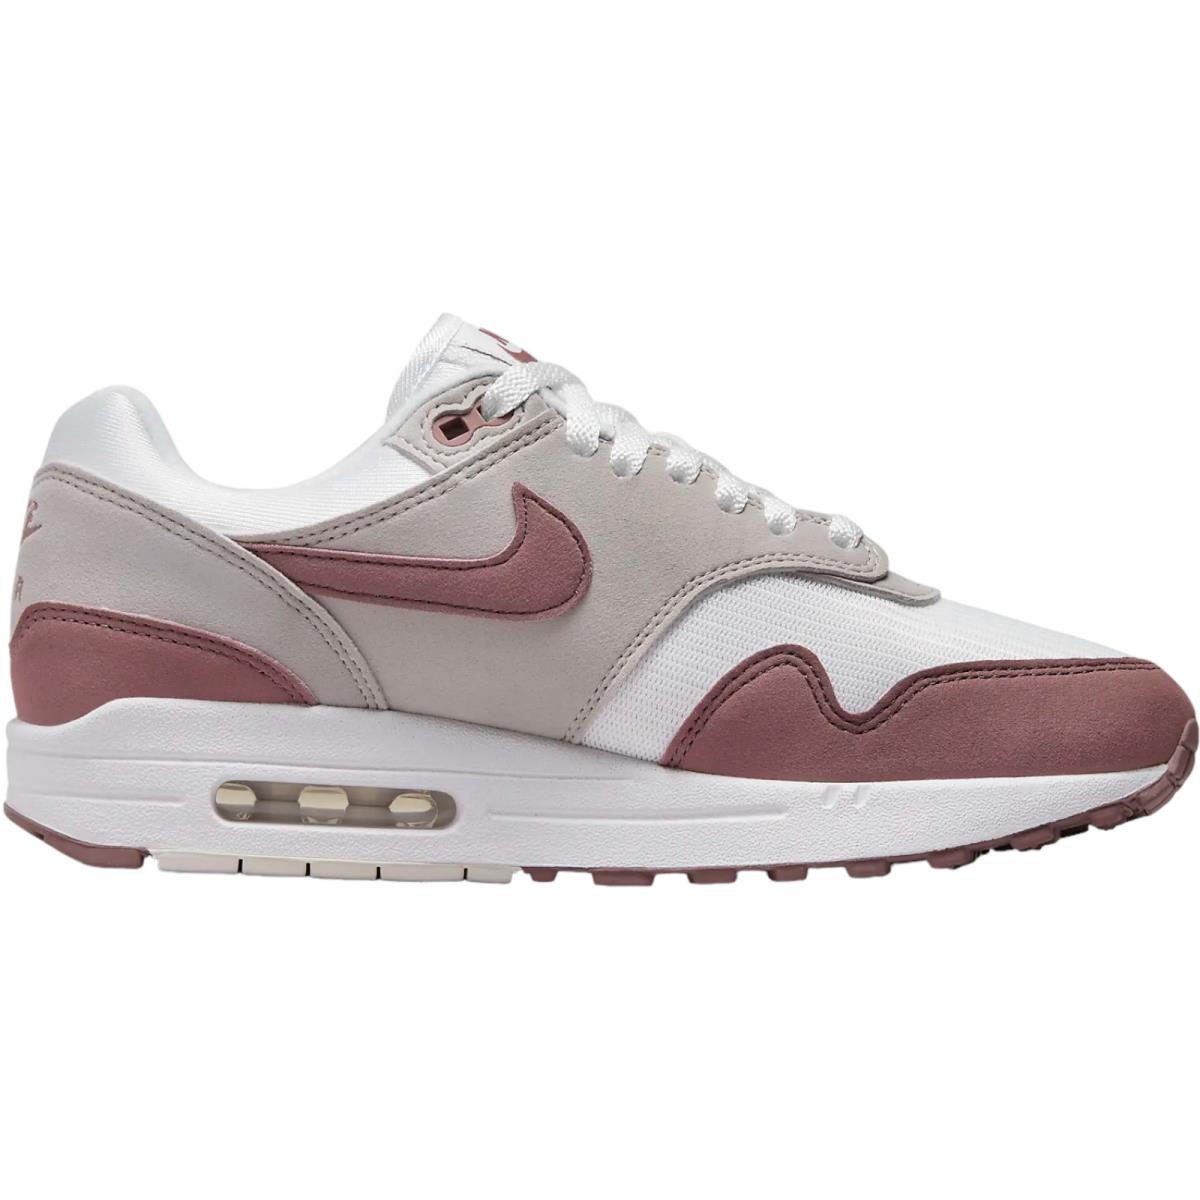 Nike Air Max 1 Women`s Casual Shoes All Colors US Sizes 6-11 Summit White/Light Iron Ore/Smokey Mauve